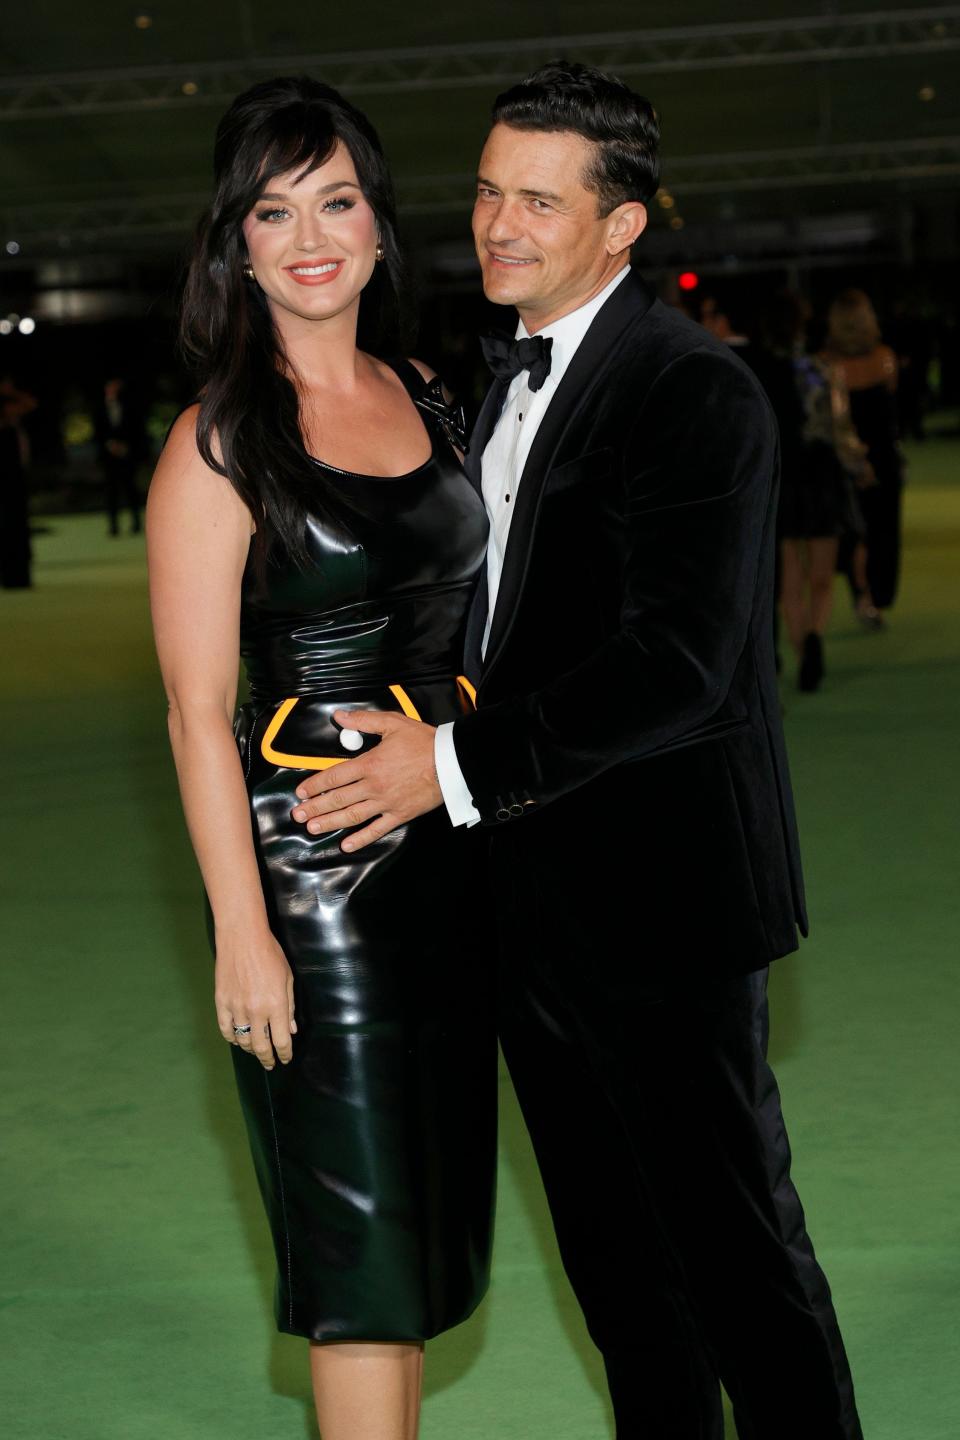 (L-R) Katy Perry and Orlando Bloom attend The Academy Museum of Motion Pictures Opening Gala on Sep. 25, 2021.